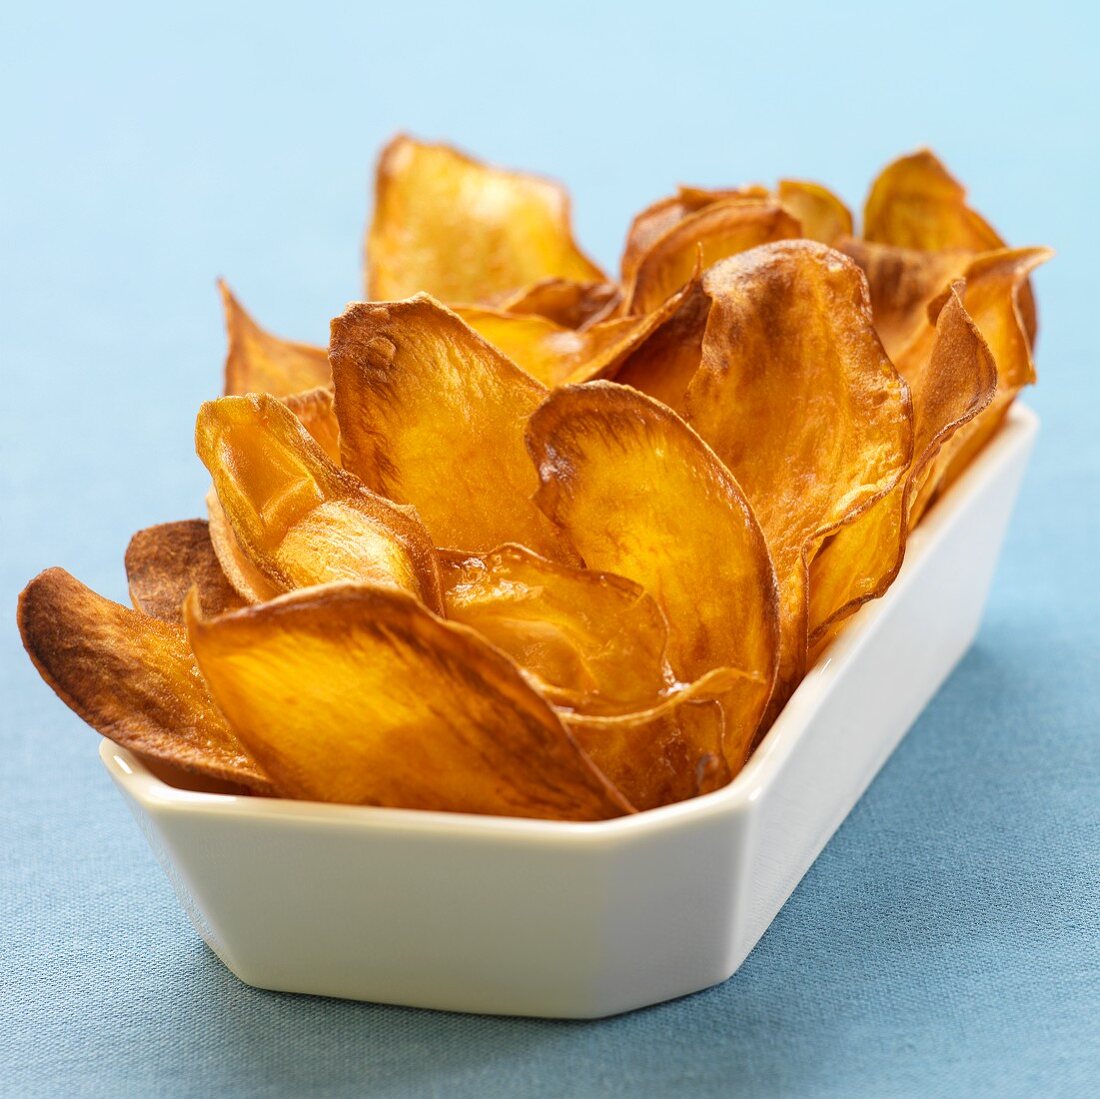 Fried Sweet Potato Chips in a White Dish